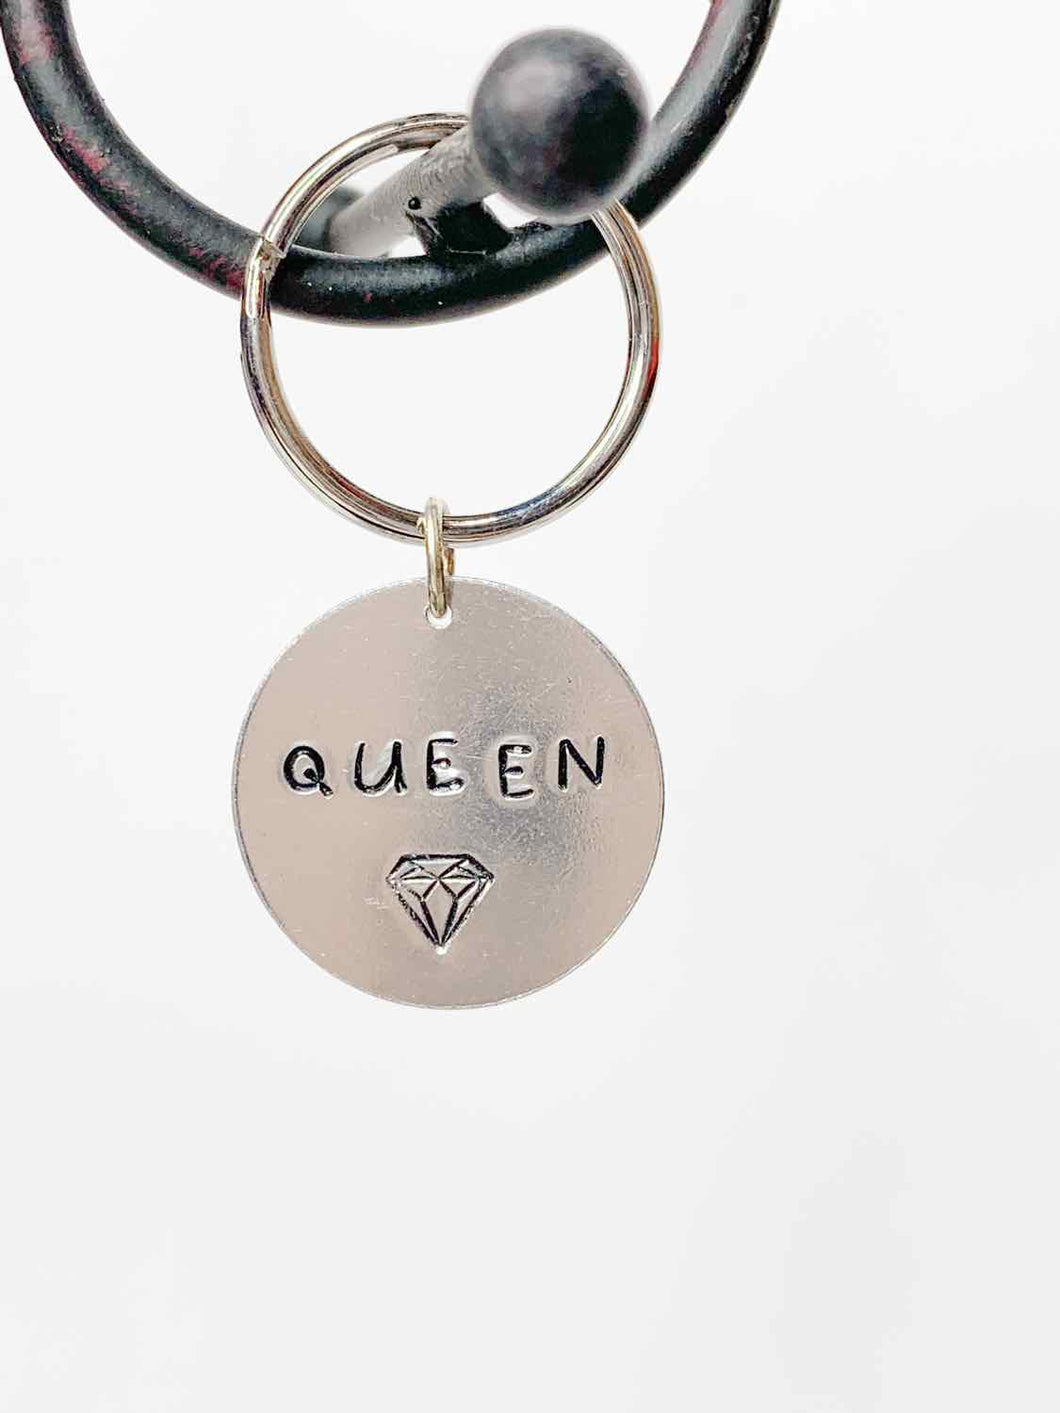 Queen - Small Key Chain